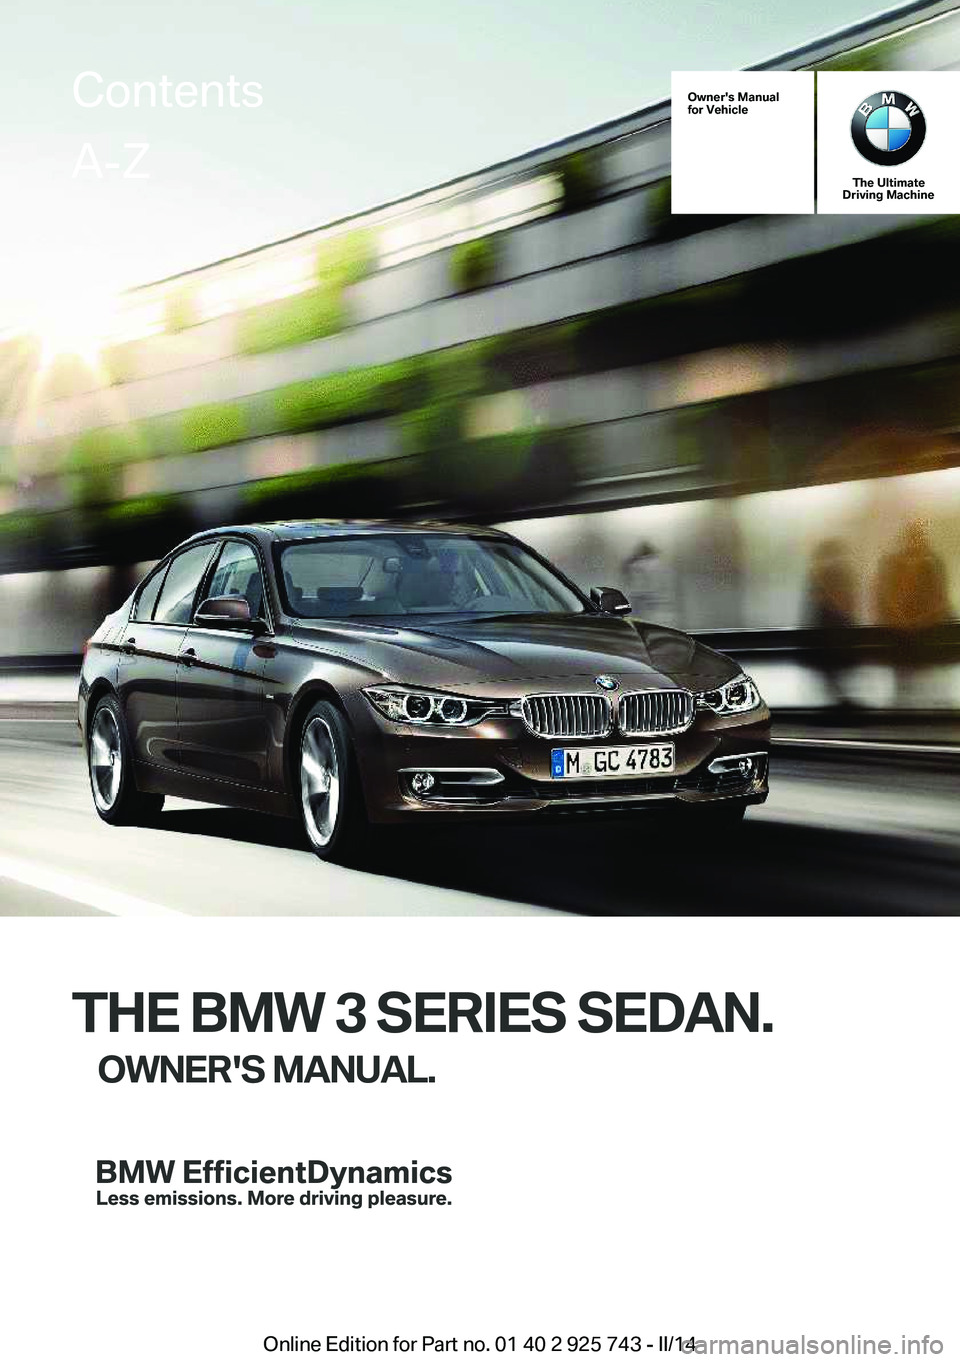 BMW 320i XDRIVE SEDAN 2014  Owners Manual Owner's Manual
for Vehicle
The Ultimate
Driving Machine
THE BMW 3 SERIES SEDAN.
OWNER'S MANUAL.
ContentsA-Z
Online Edition for Part no. 01 40 2 925 743 - II/14   